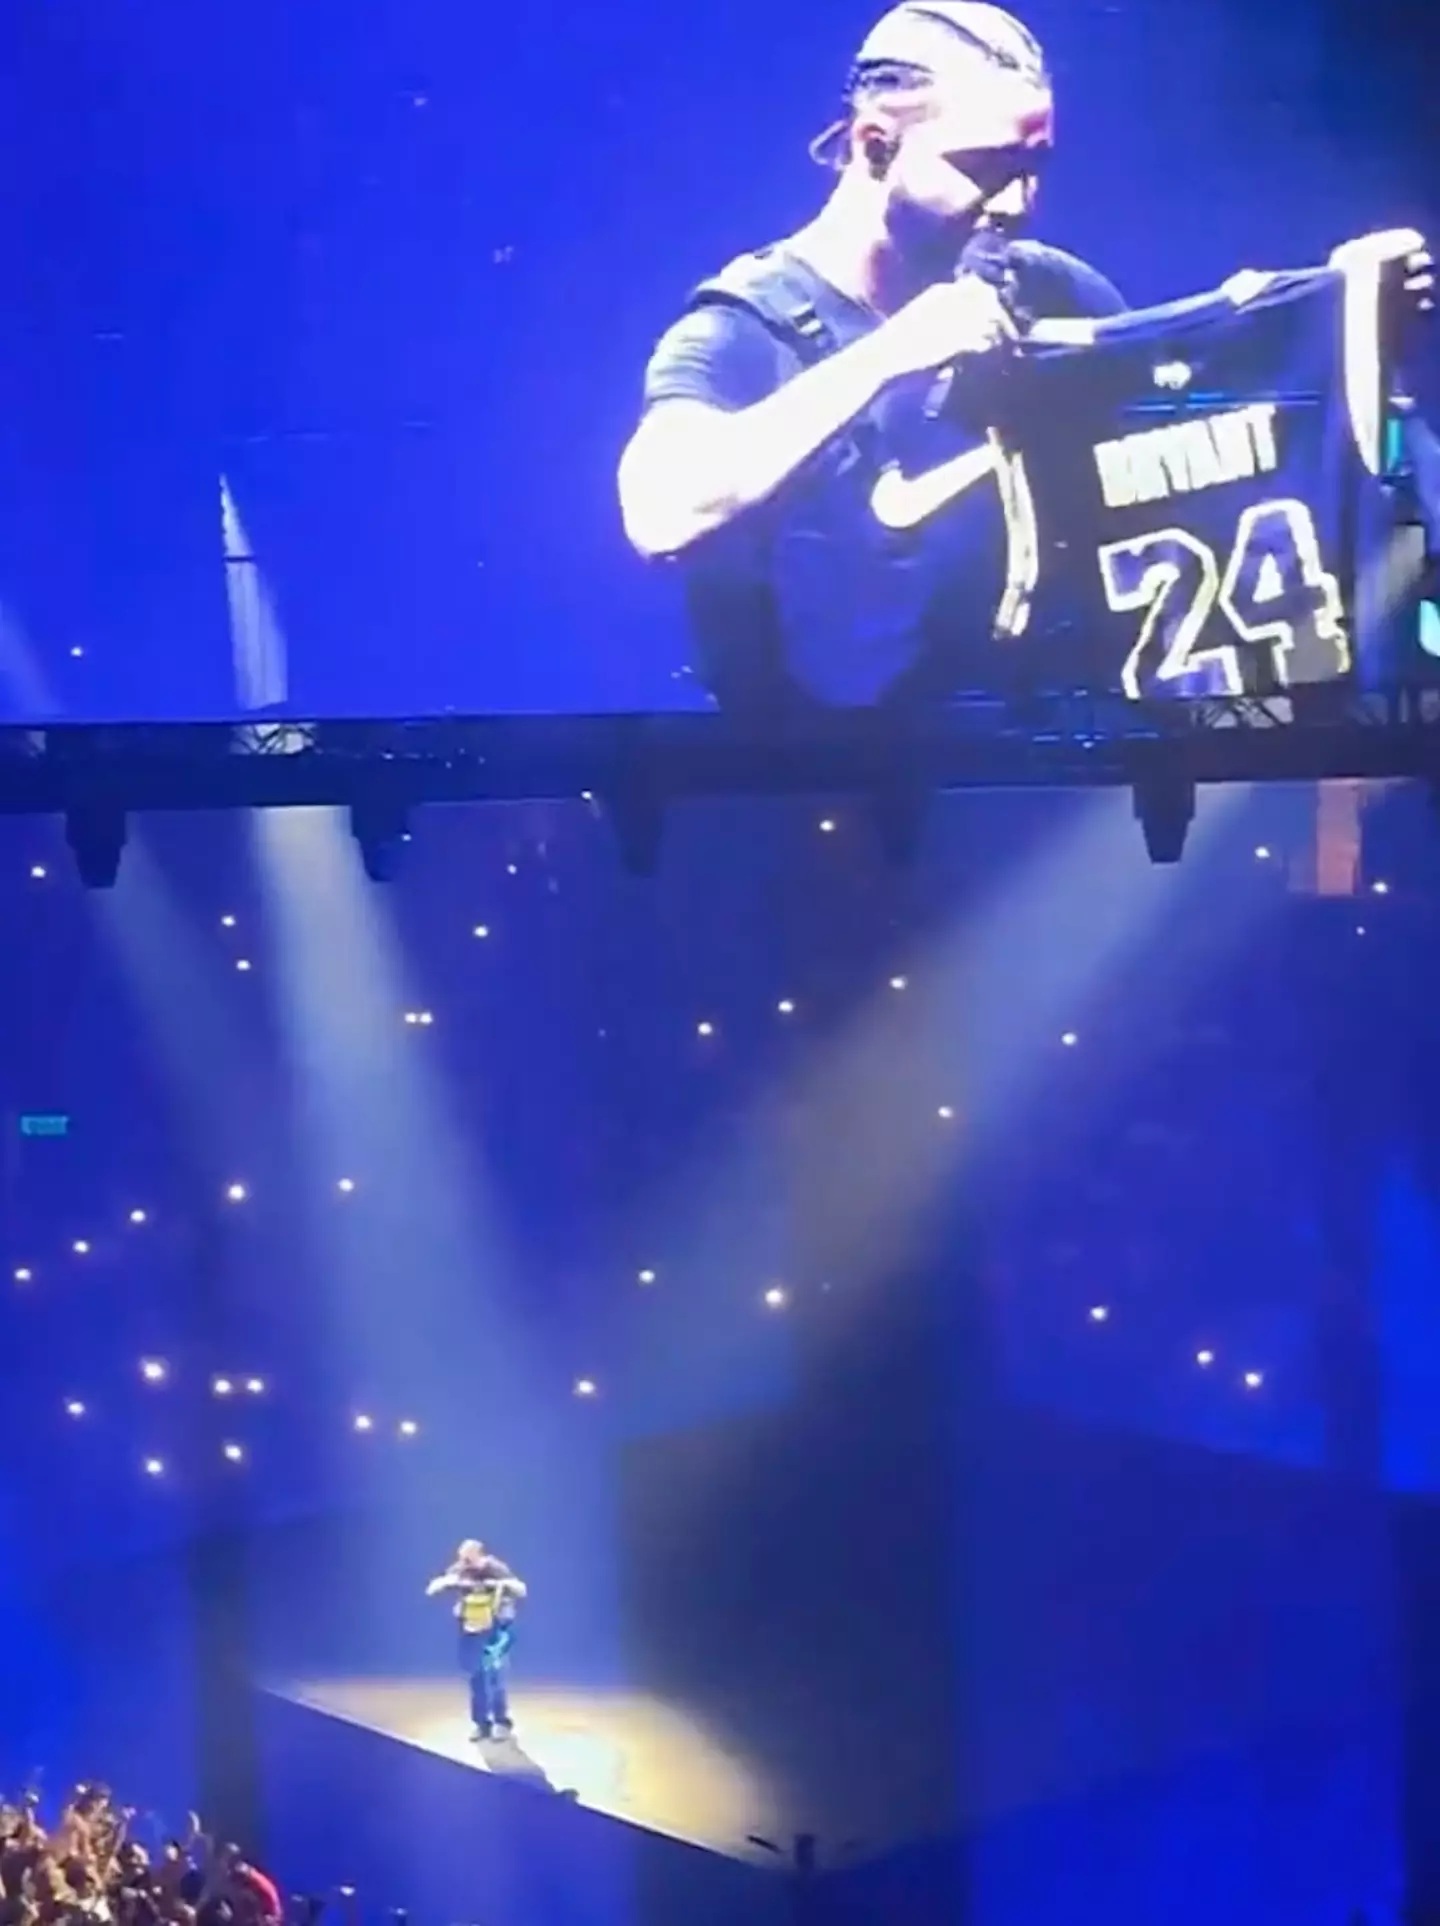 Drake picked up a Kobe Bryant jersey during his show.